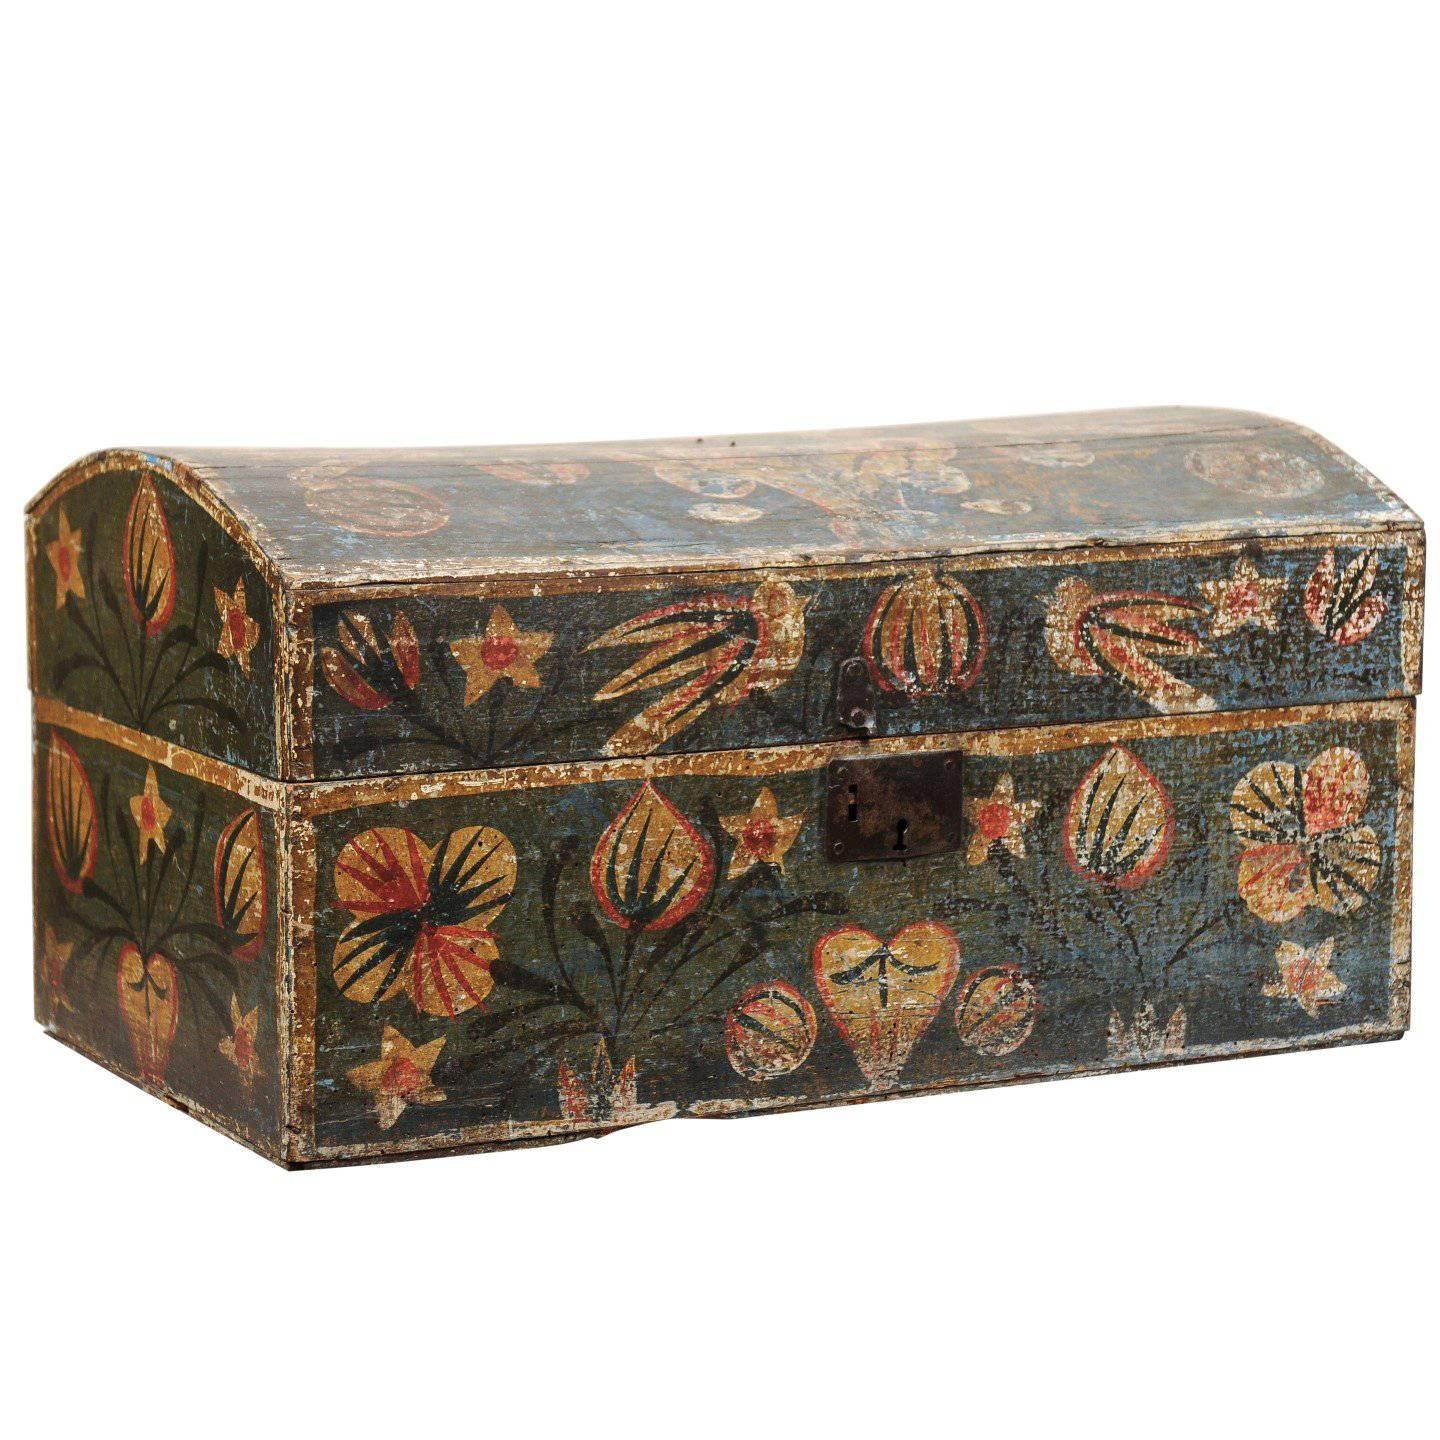 19th Century, Swedish Painted Brides Box with Floral Motif